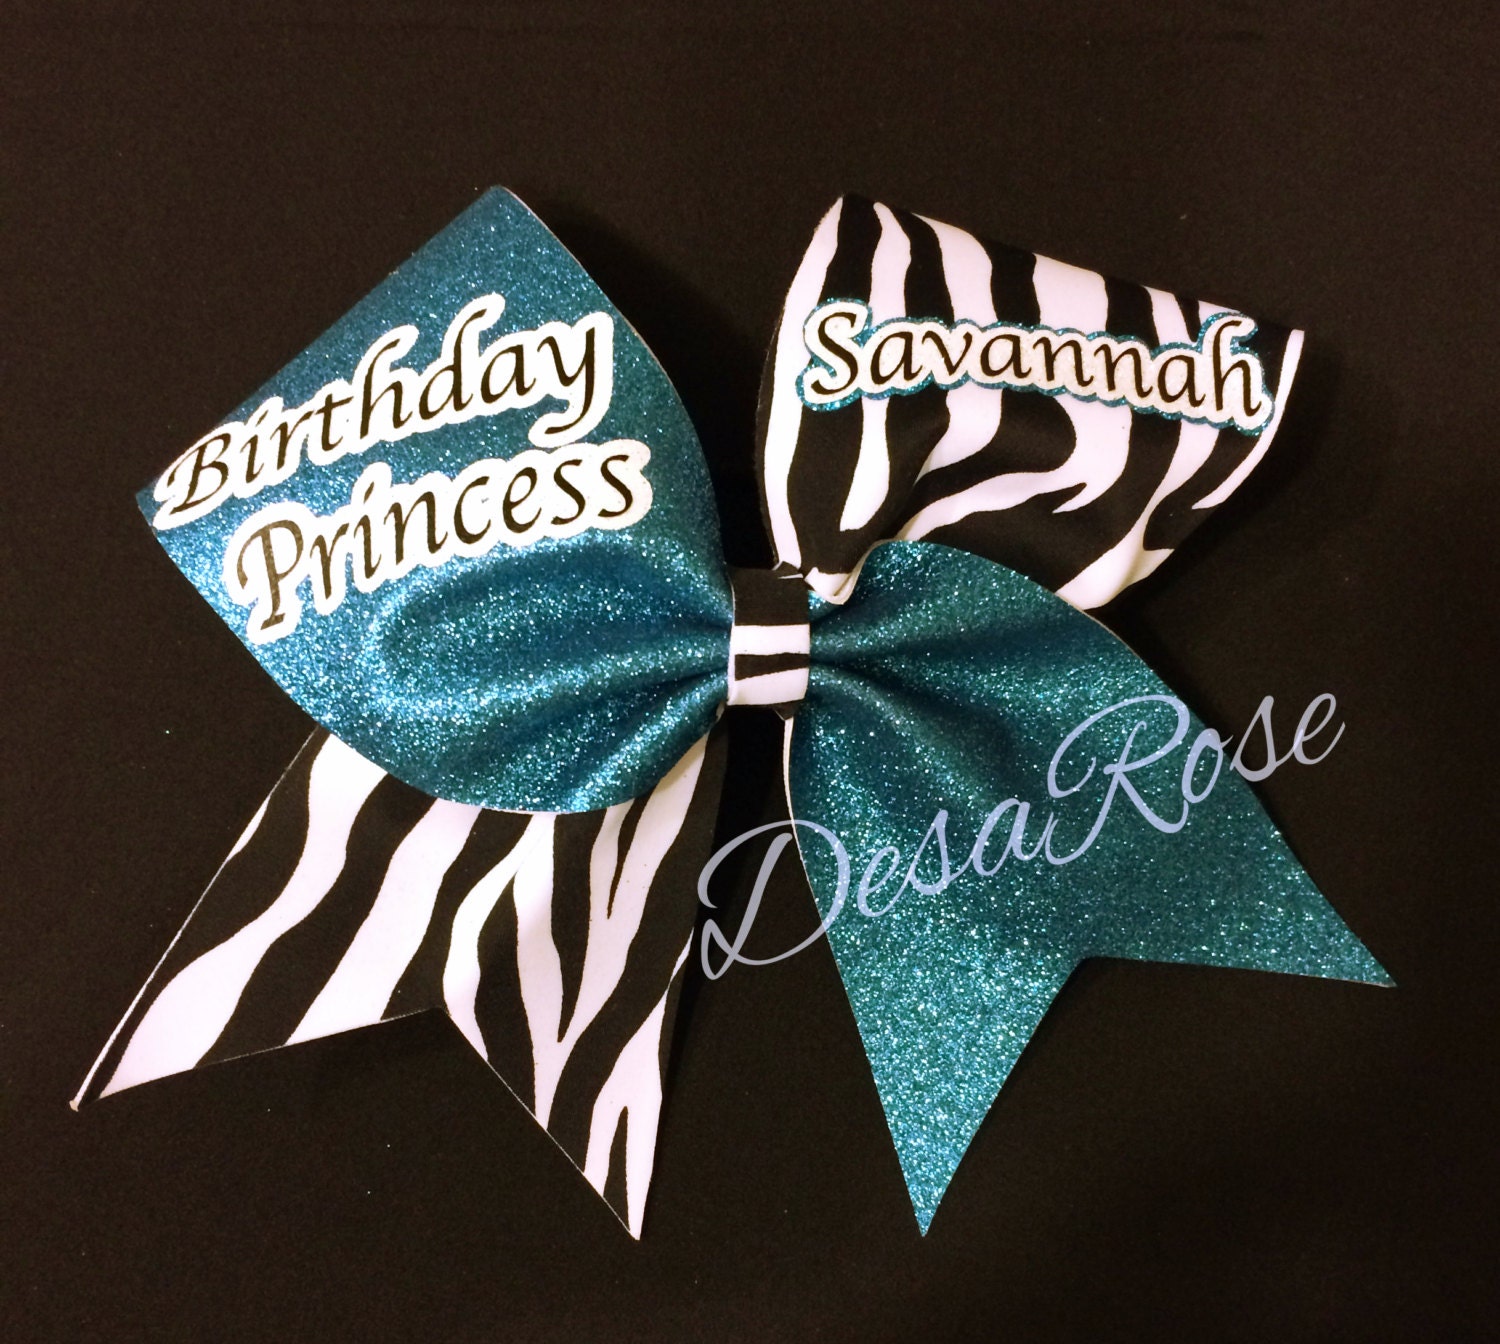 Teal and Black Ombré Glitter Tailless Rhinestone Bow Cheer 